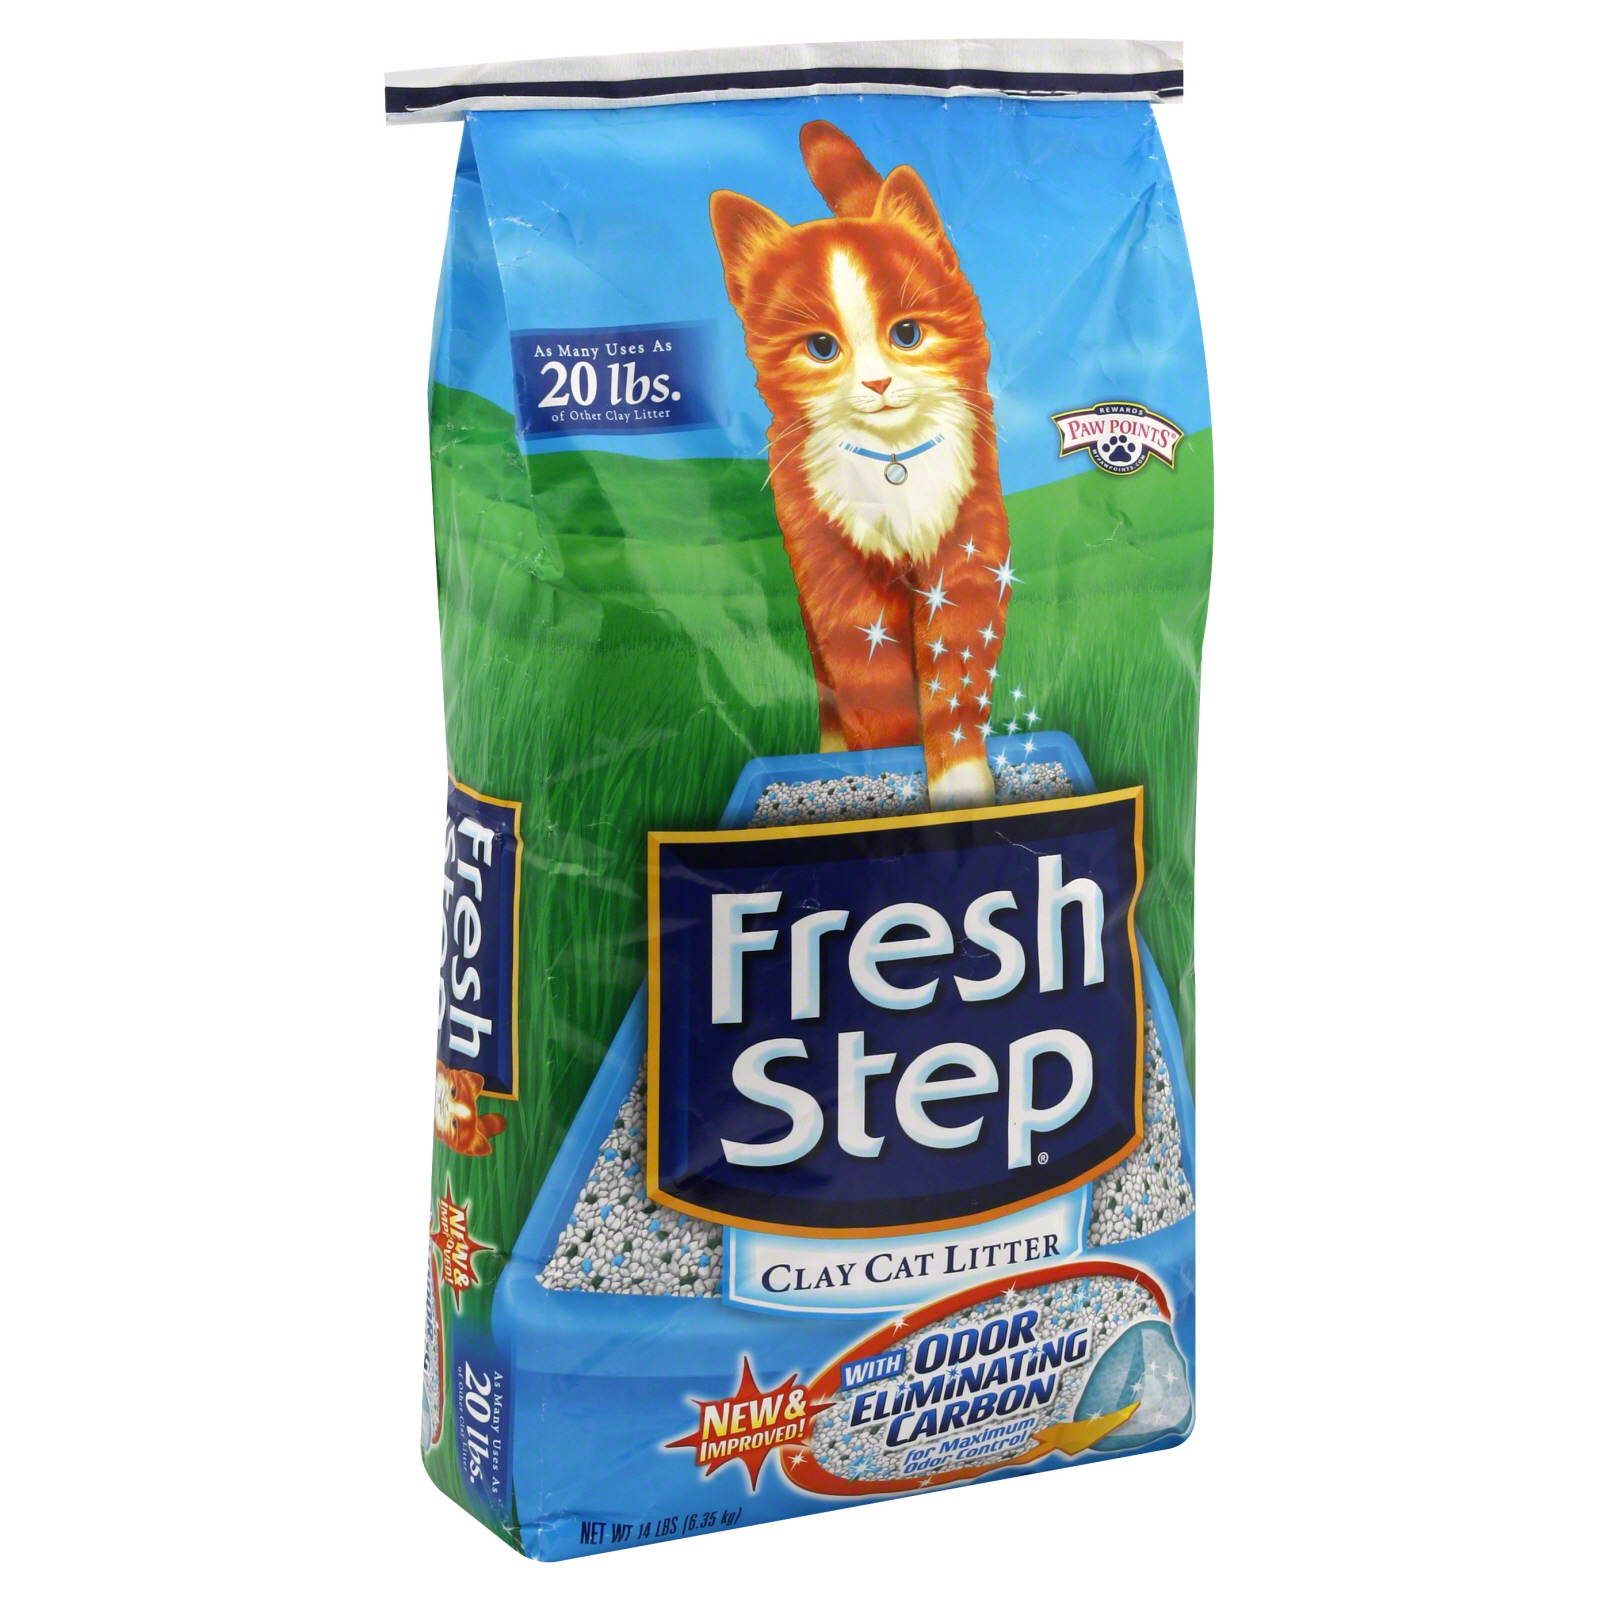 Fresh Step Clay Cat Litter, With Odor Eliminating Carbon, 14 lbs (6.35 kg)